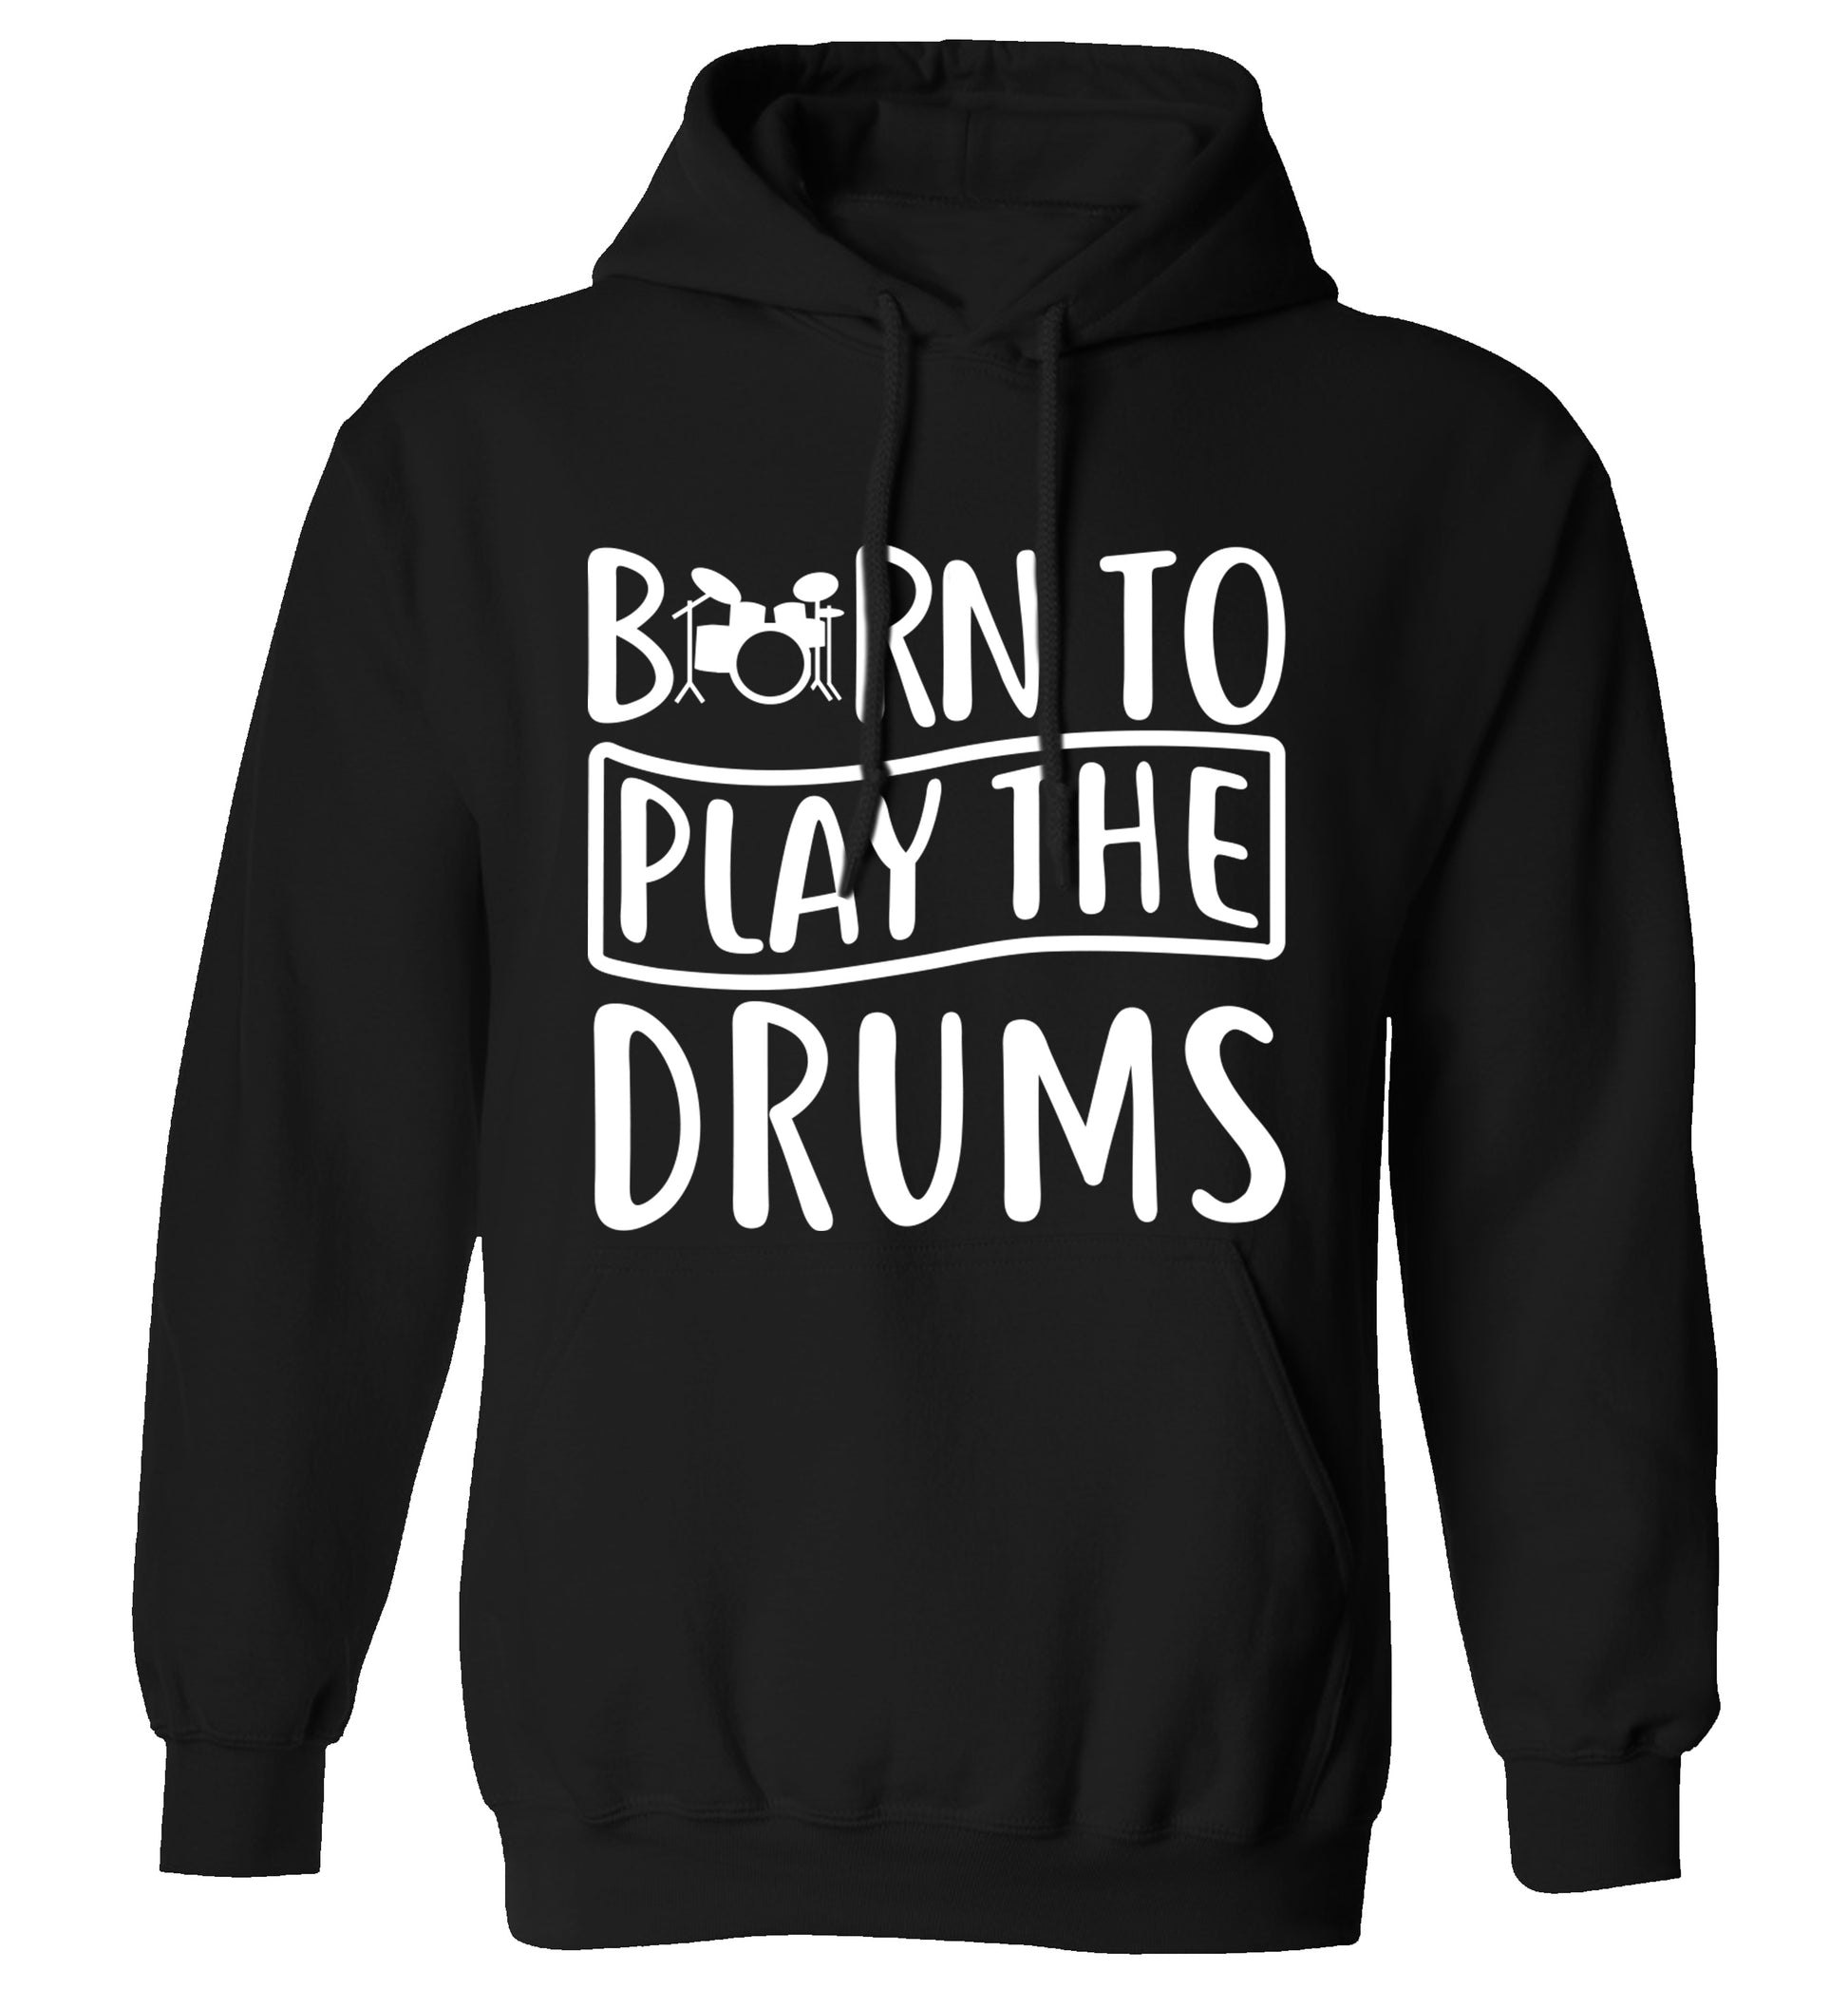 Born to play the drums adults unisex black hoodie 2XL